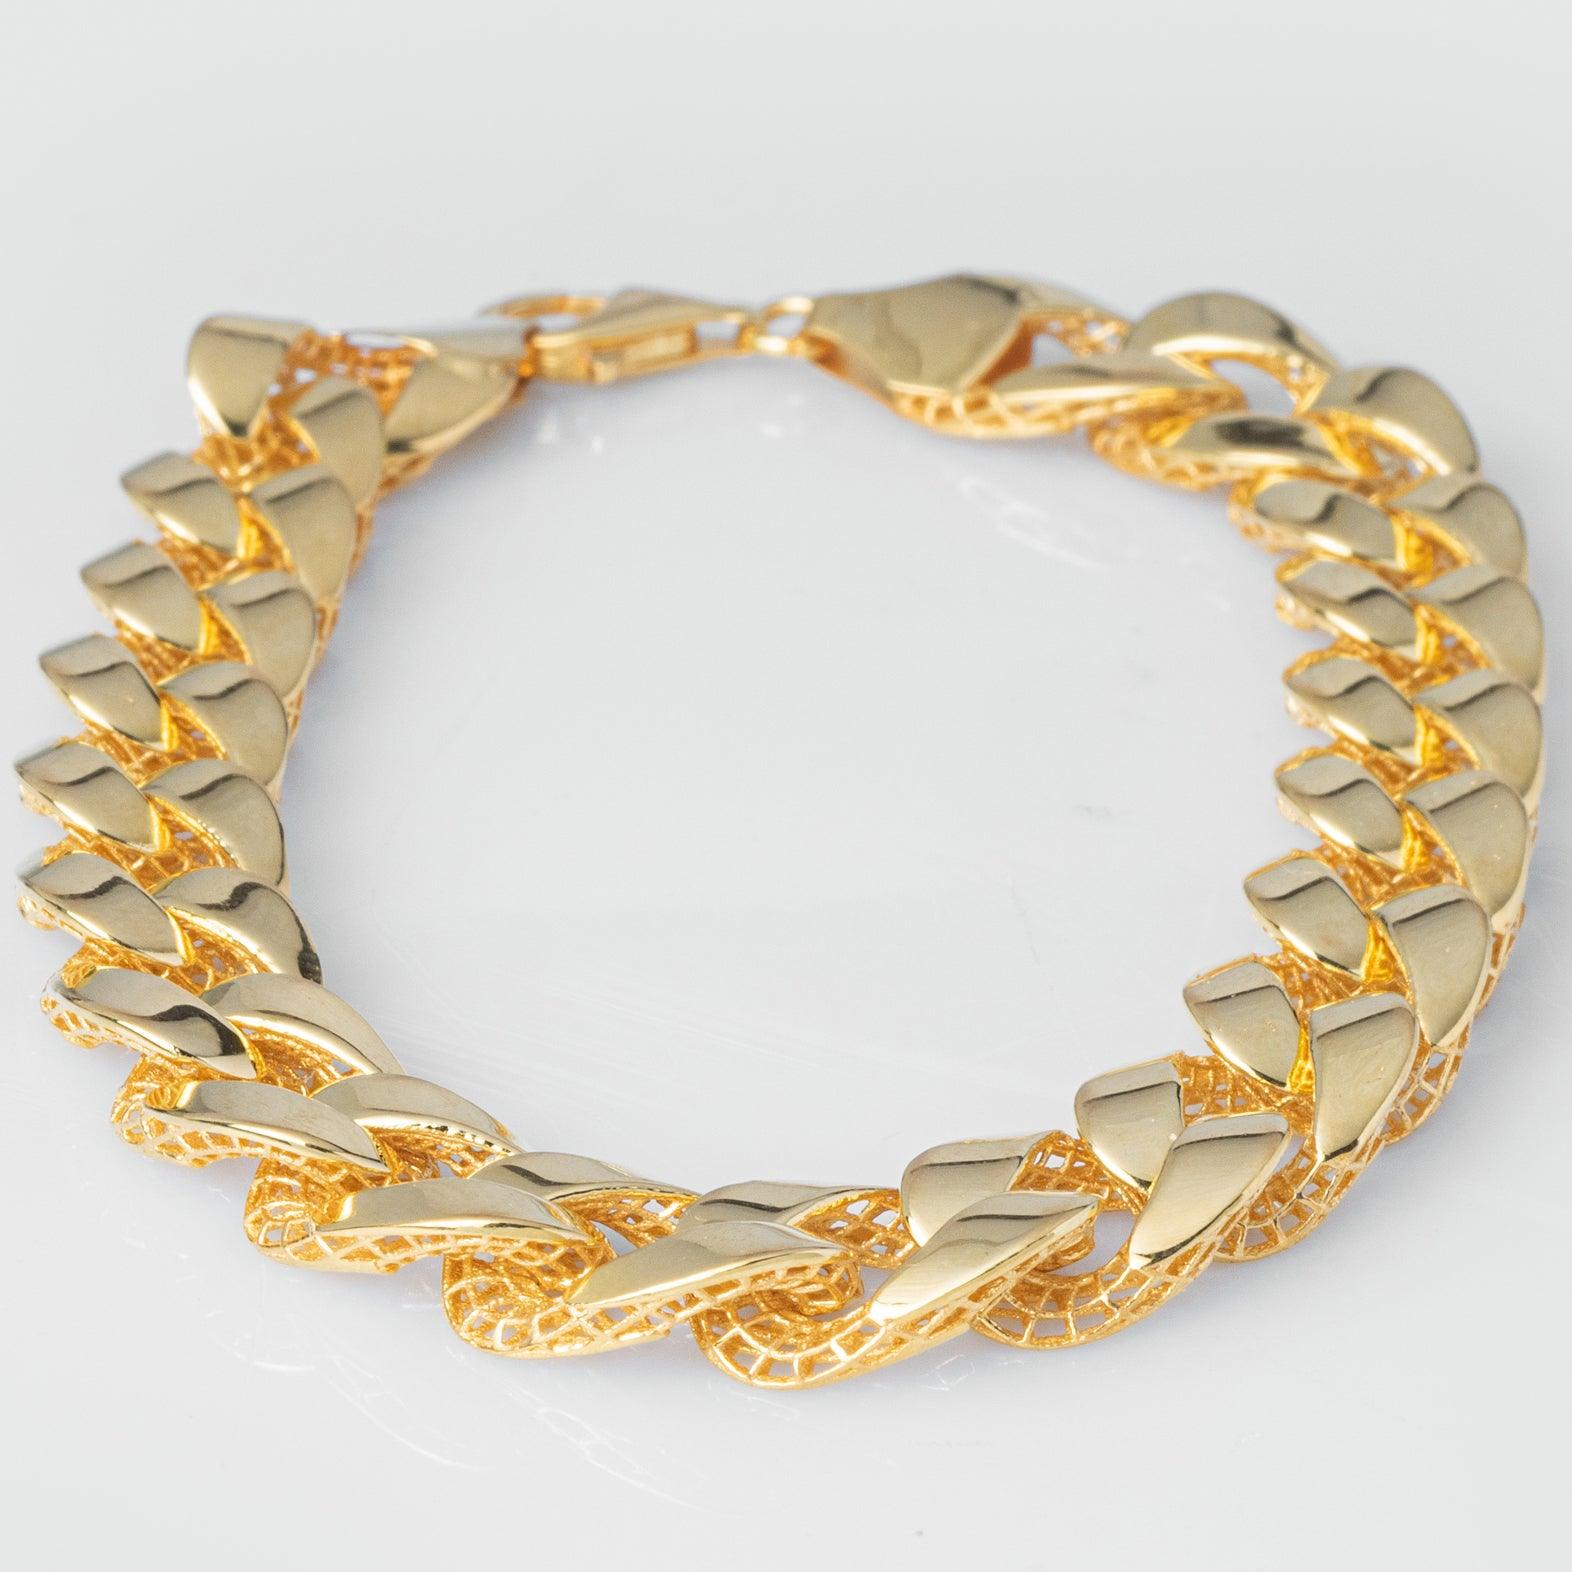 22ct Gold Curb Link Gents Bracelet with Mirror Finish and Mesh Support Backing fitted with a Lobster Clasp GBR-8042